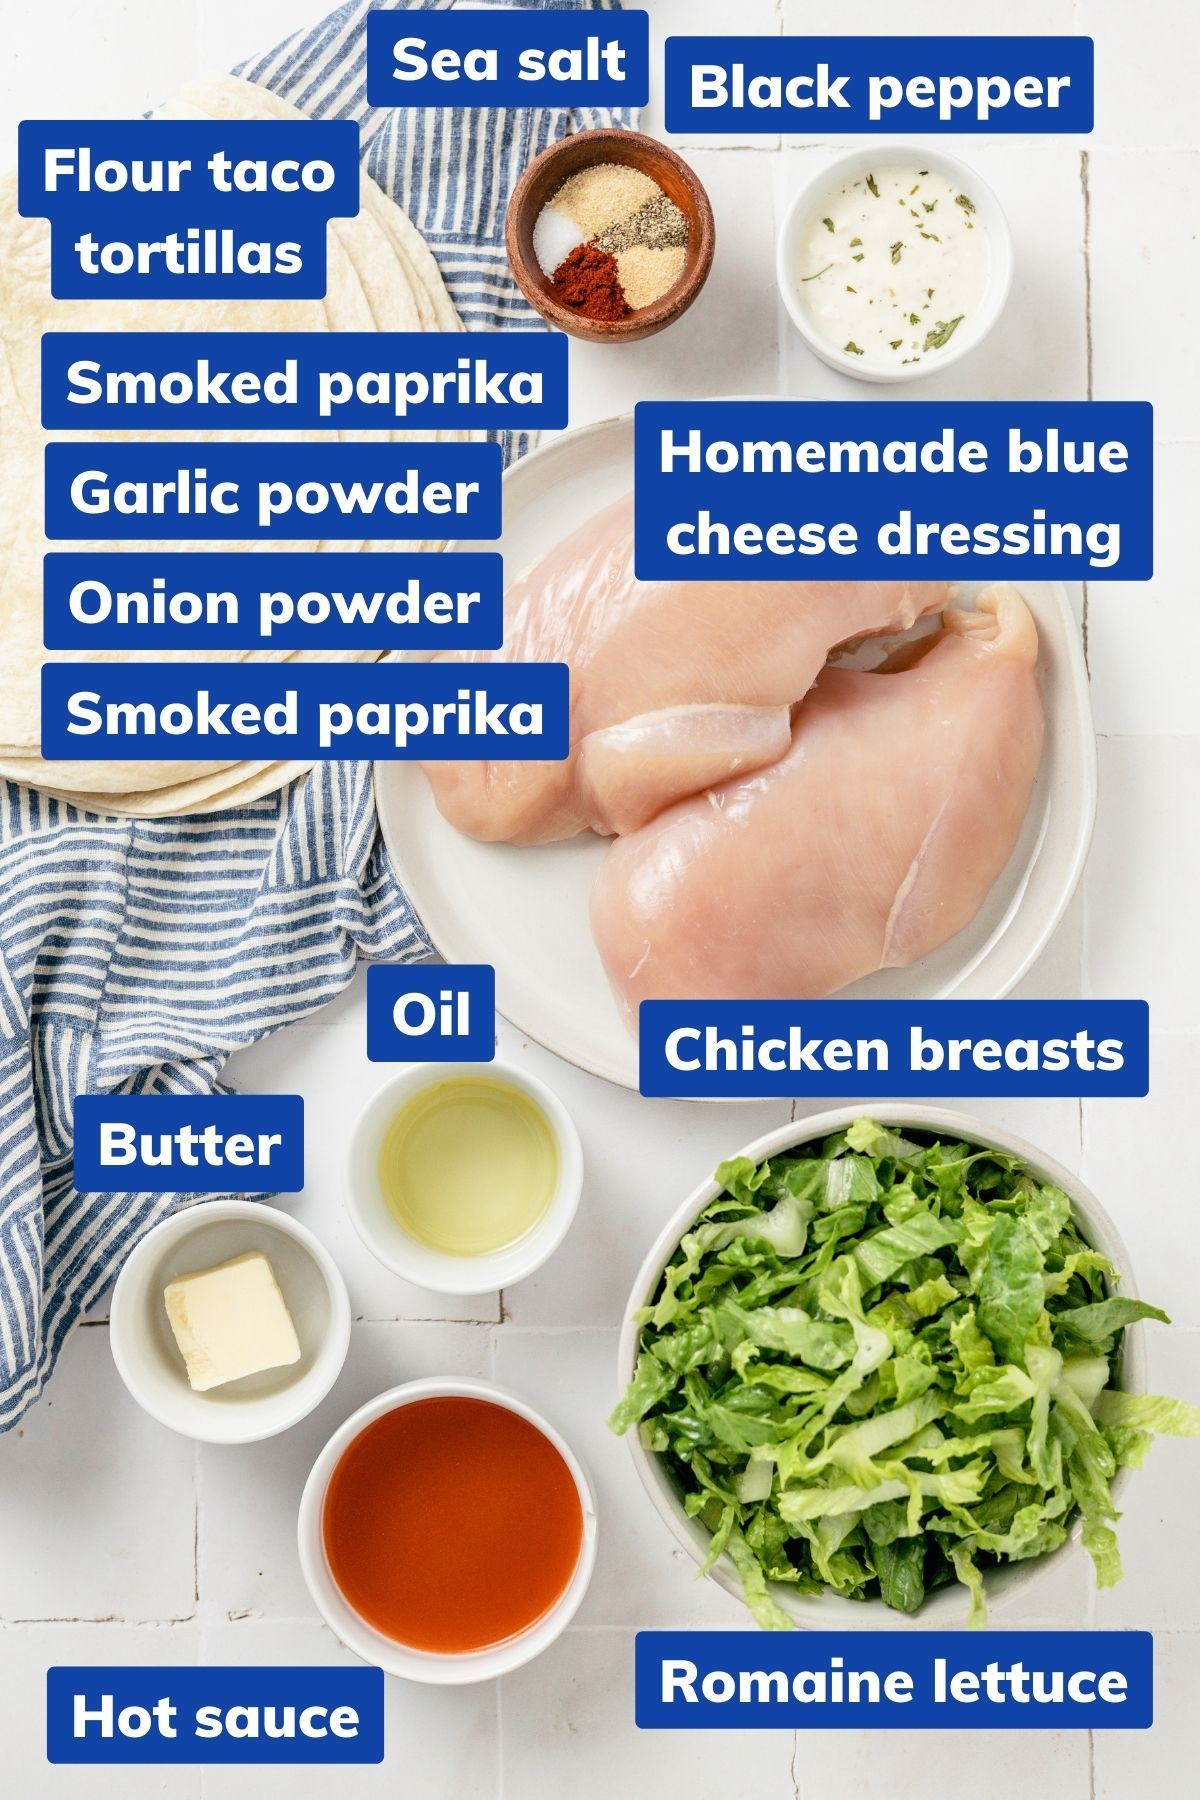 Chicken breasts, optional sea salt, black pepper, smoked paprika, garlic and onion powders, oil, buffalo and Frank's red hot sauces, unsalted butter, tortillas (flour or corn), romaine lettuce, blue cheese dressing, and avocado or olive oil spray are displayed in separate bowls.